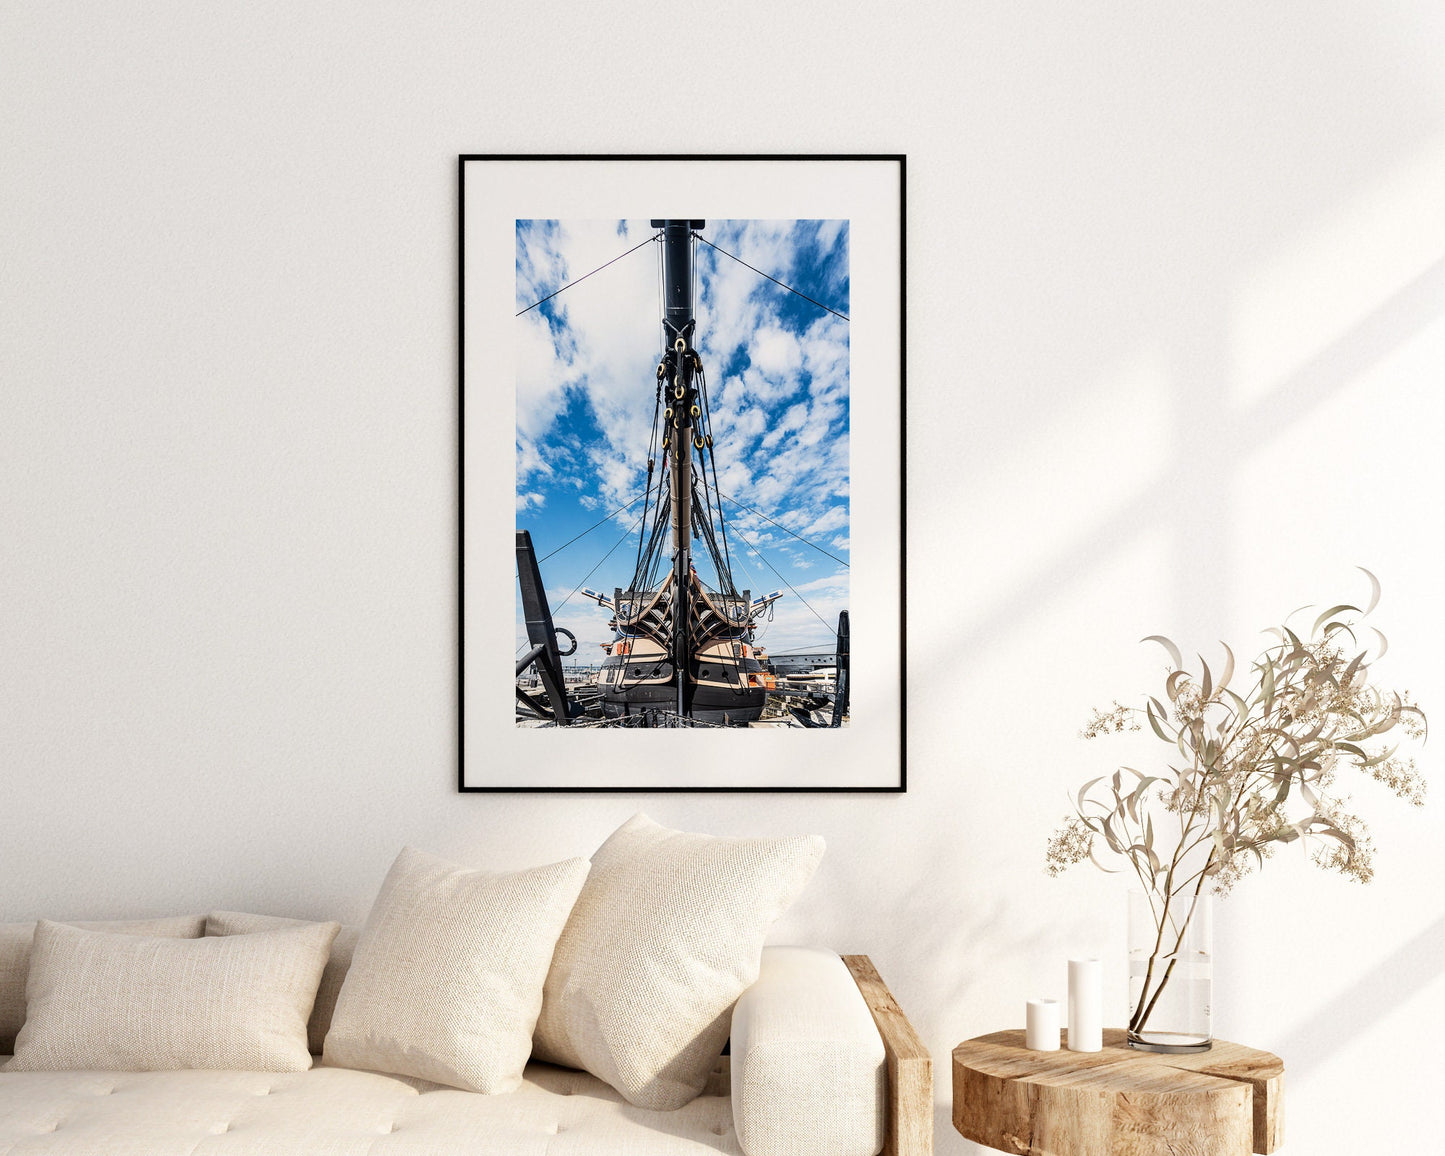 Victory - Photography Print - Portsmouth and Southsea Prints - Wall Art -  Frame and Canvas Options - Portrait